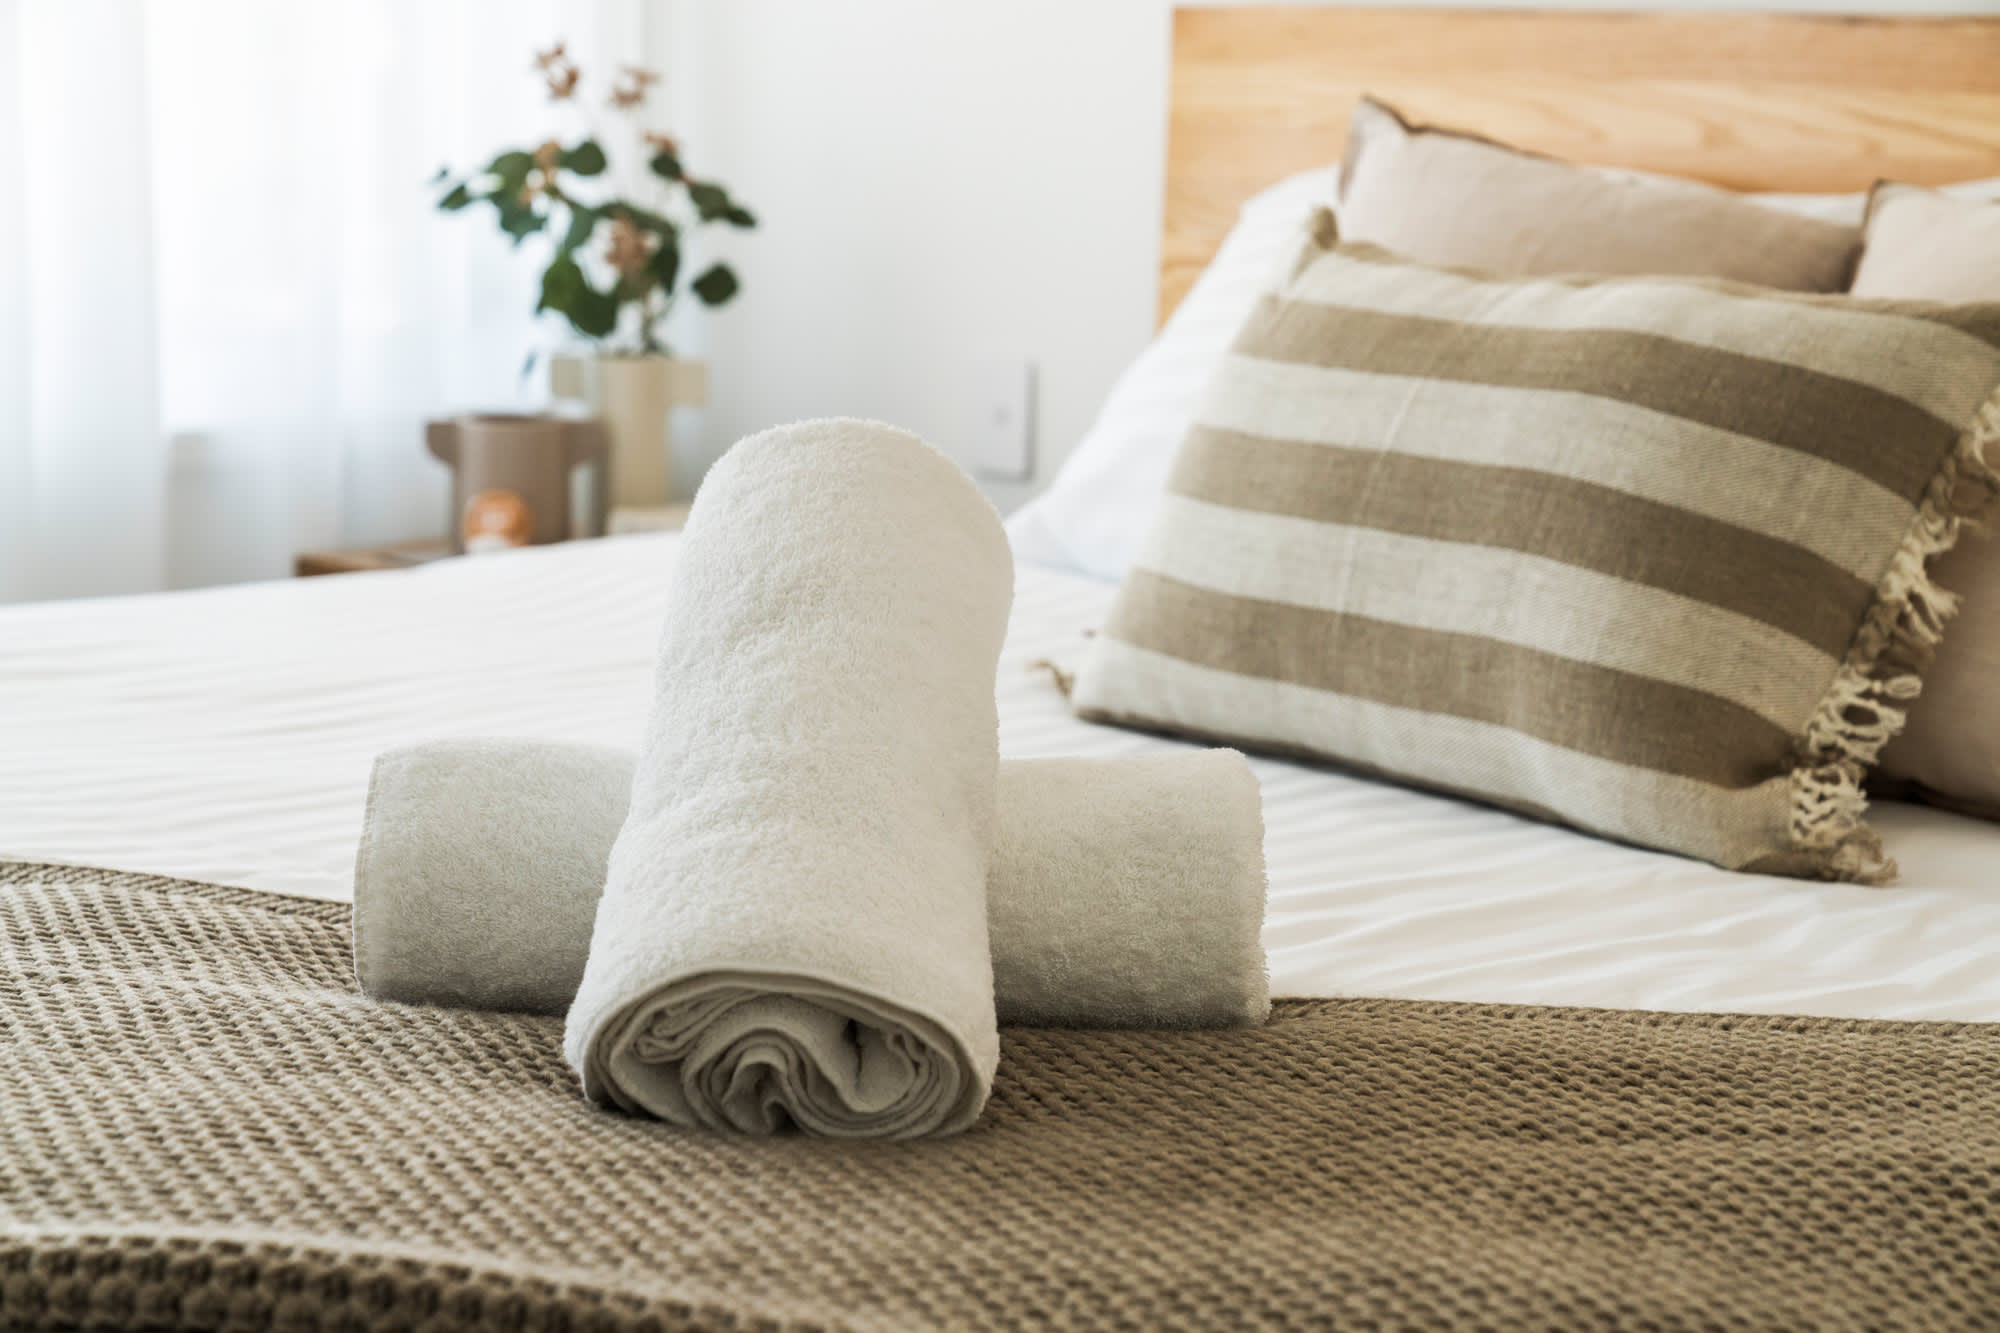 Fresh towels and linen